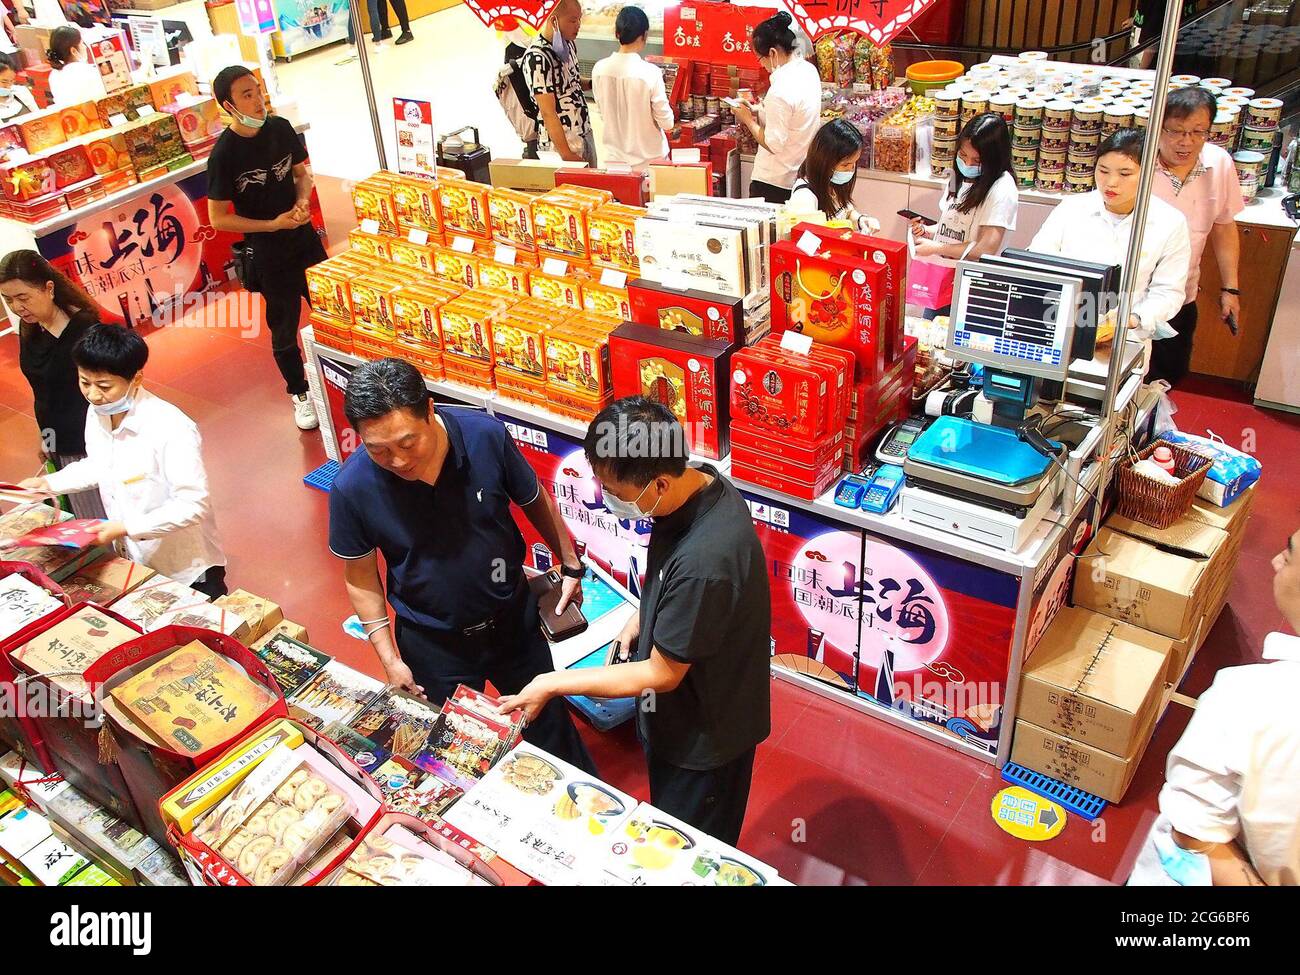 Shanghai, China. 9th Sep, 2020. Customers purchase food at a shop in Shanghai, east China, Sept. 9, 2020. China's consumer price index (CPI), the main gauge of inflation, grew 2.4 percent year on year last month, moderating from the 2.7-percent gain in July, according to data from the National Bureau of Statistics. Credit: Chen Fei/Xinhua/Alamy Live News Stock Photo